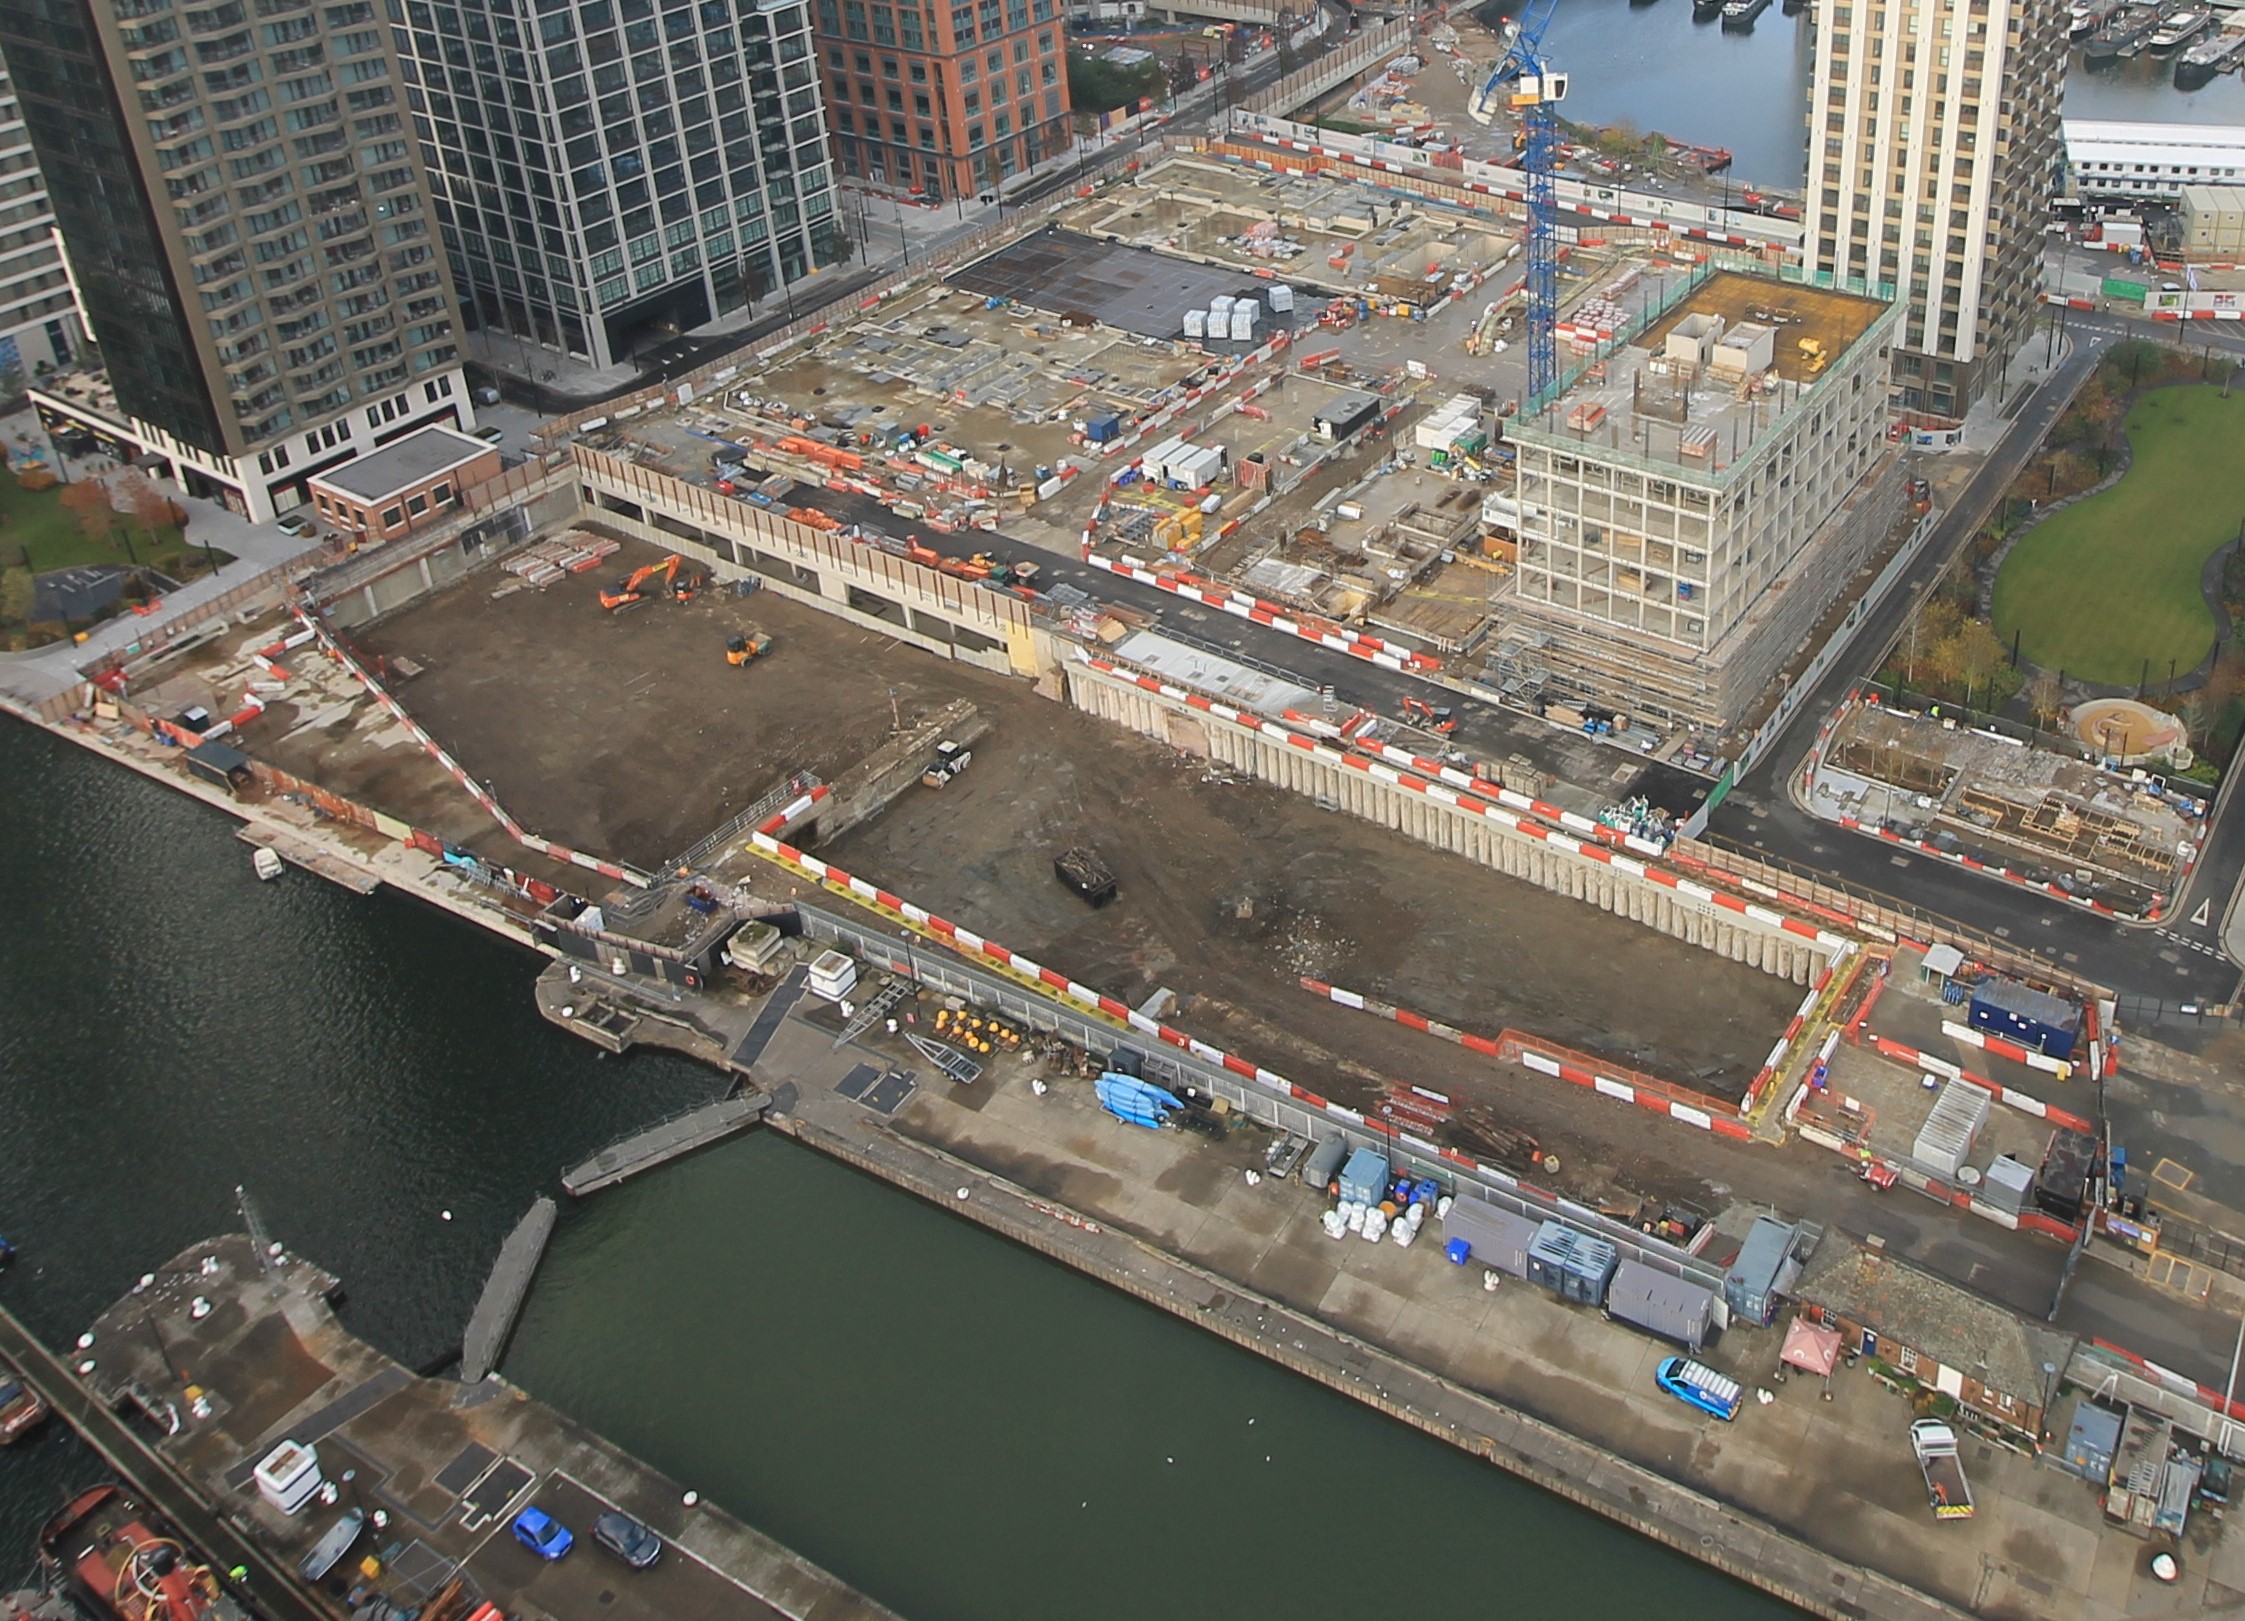 Piling continues at Wood Wharf Development Phase 3